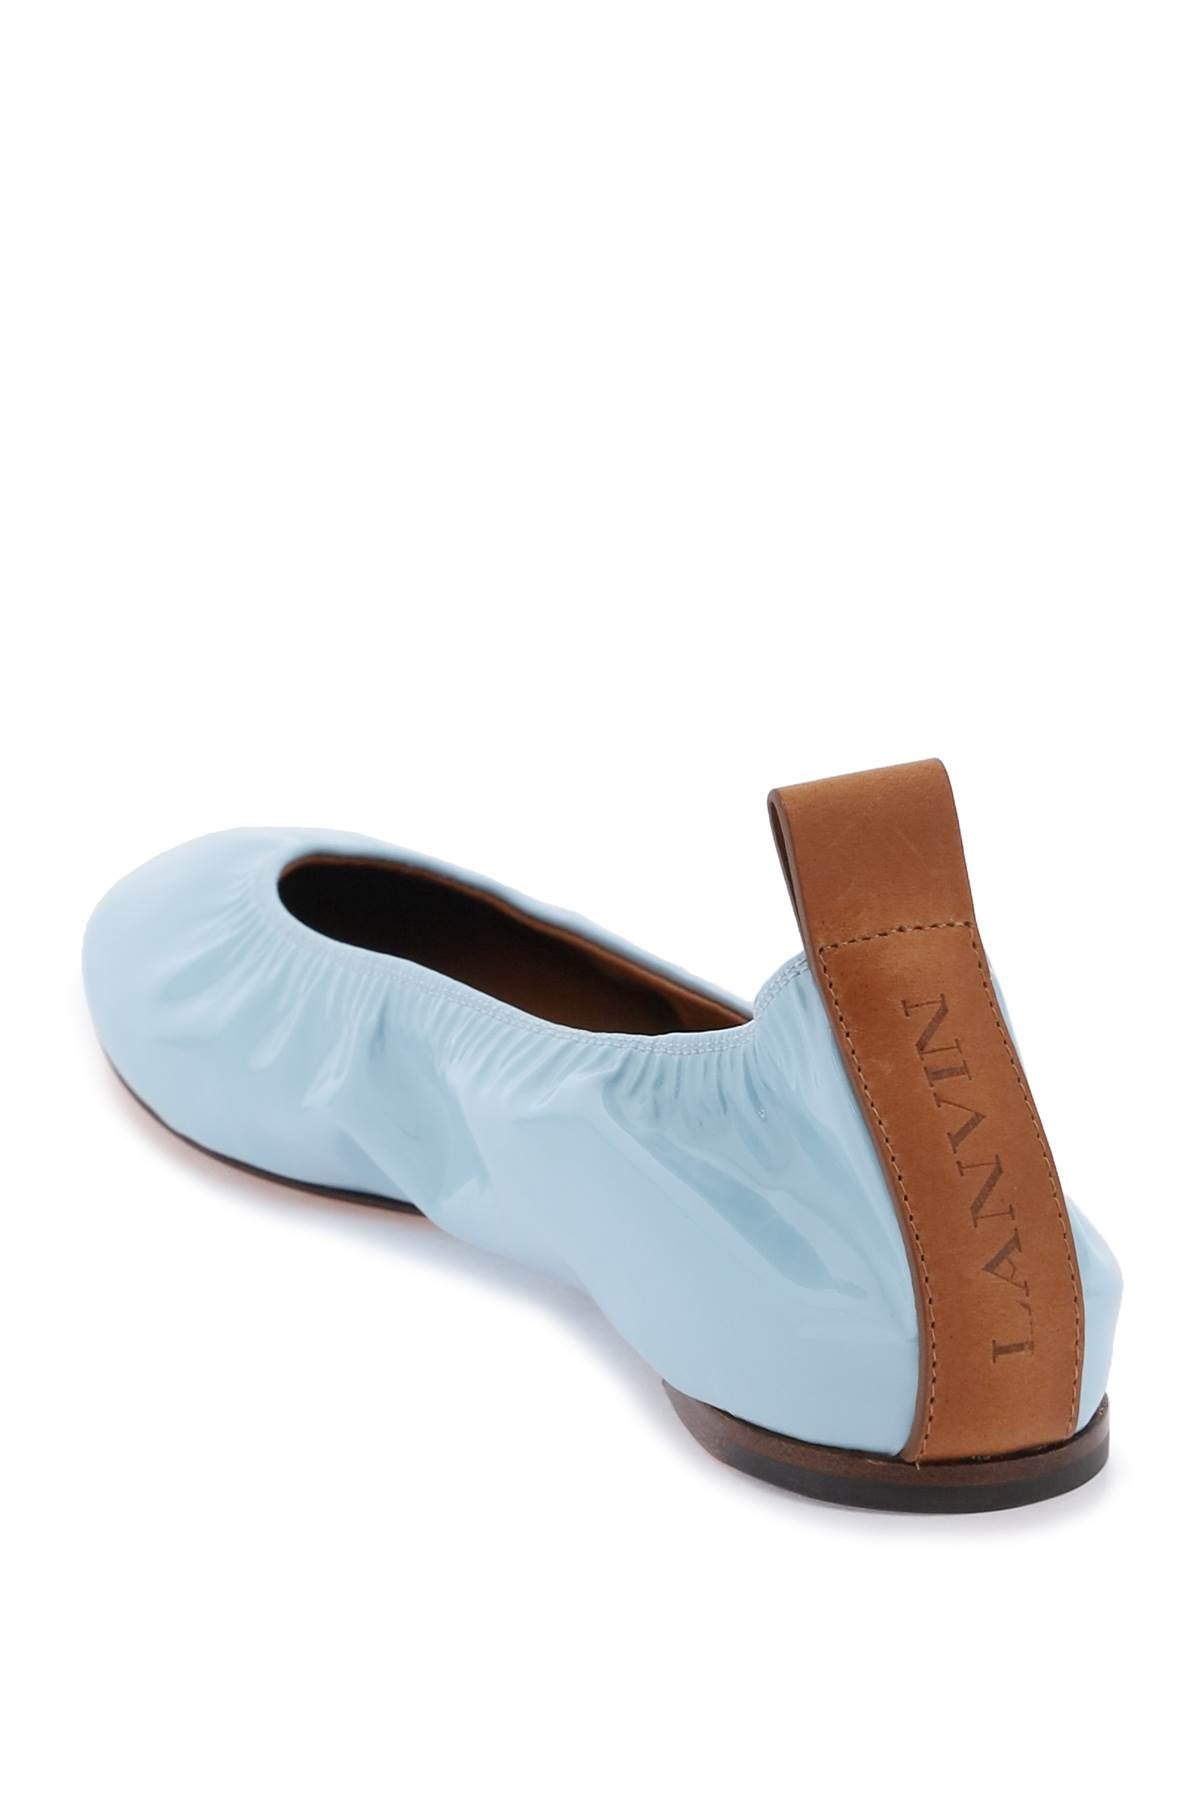 Lanvin the ballerina flat in patent leather